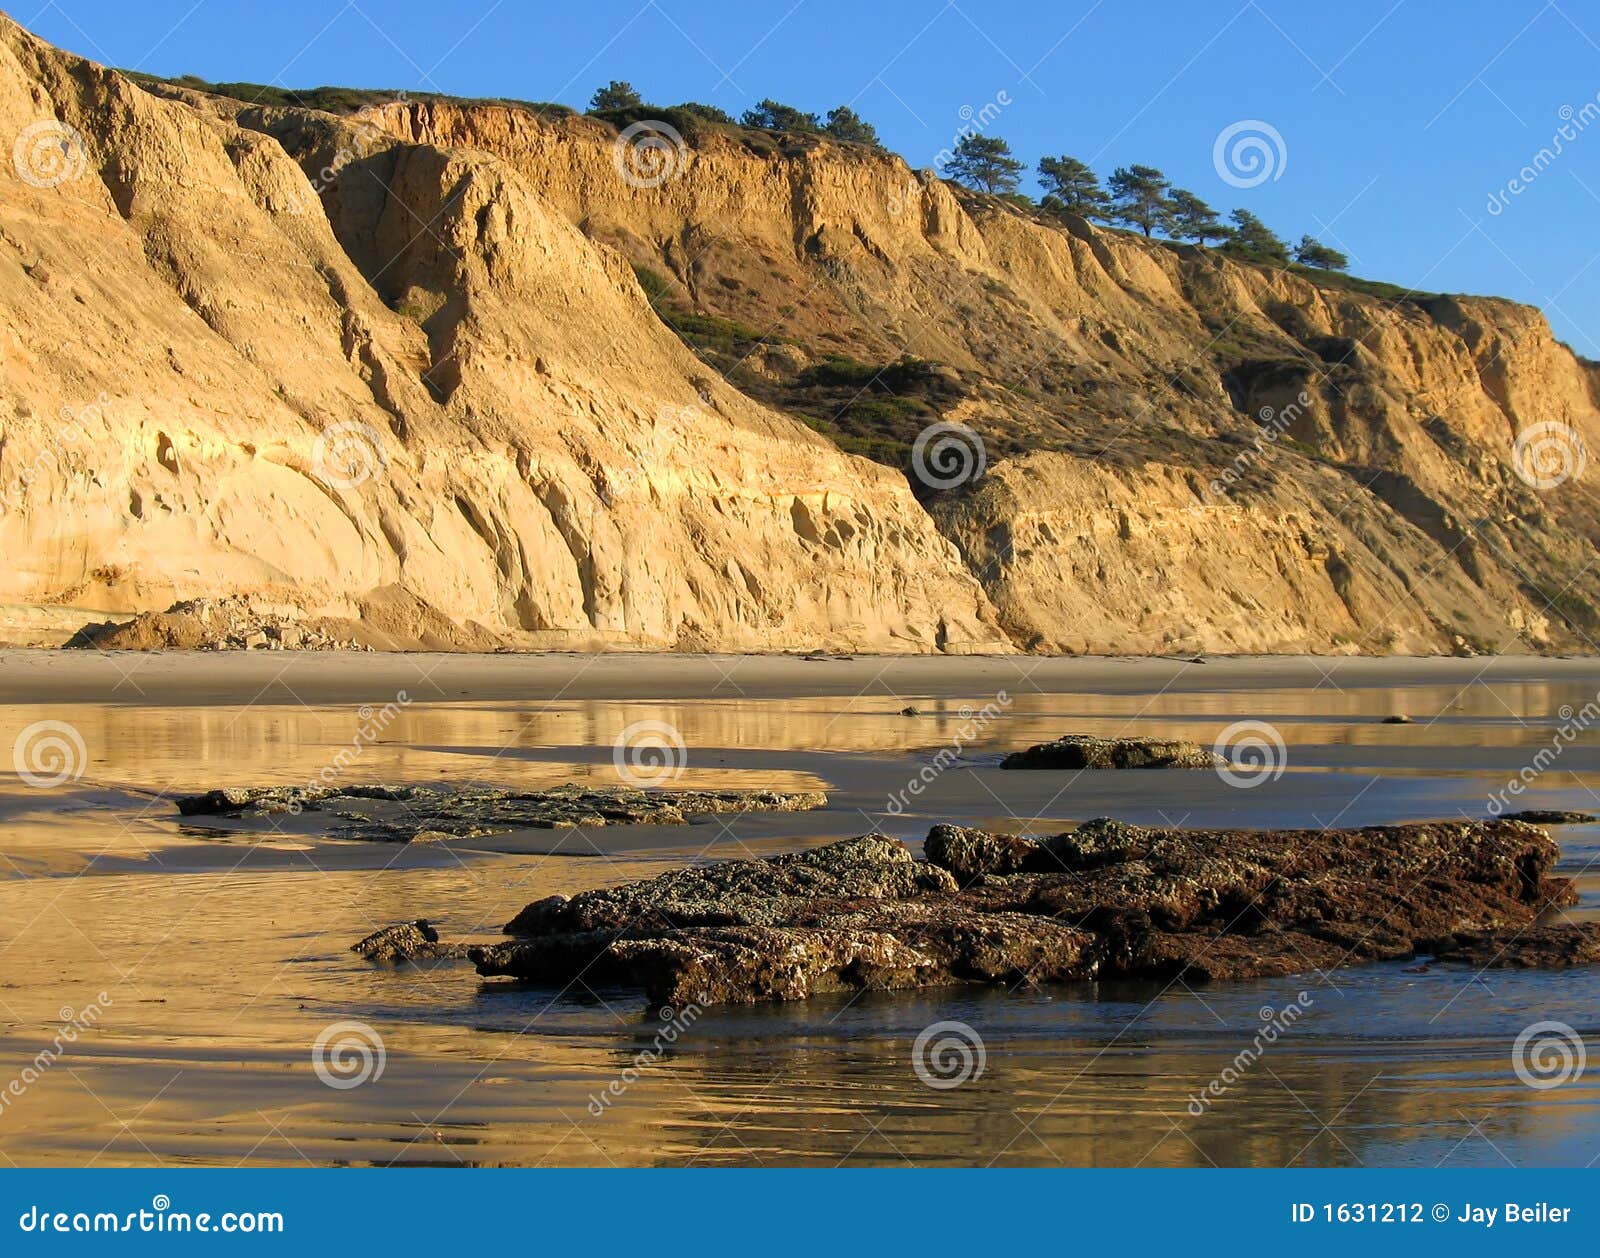 cliffs with reflections at torrey pines state beach, la jolla, california